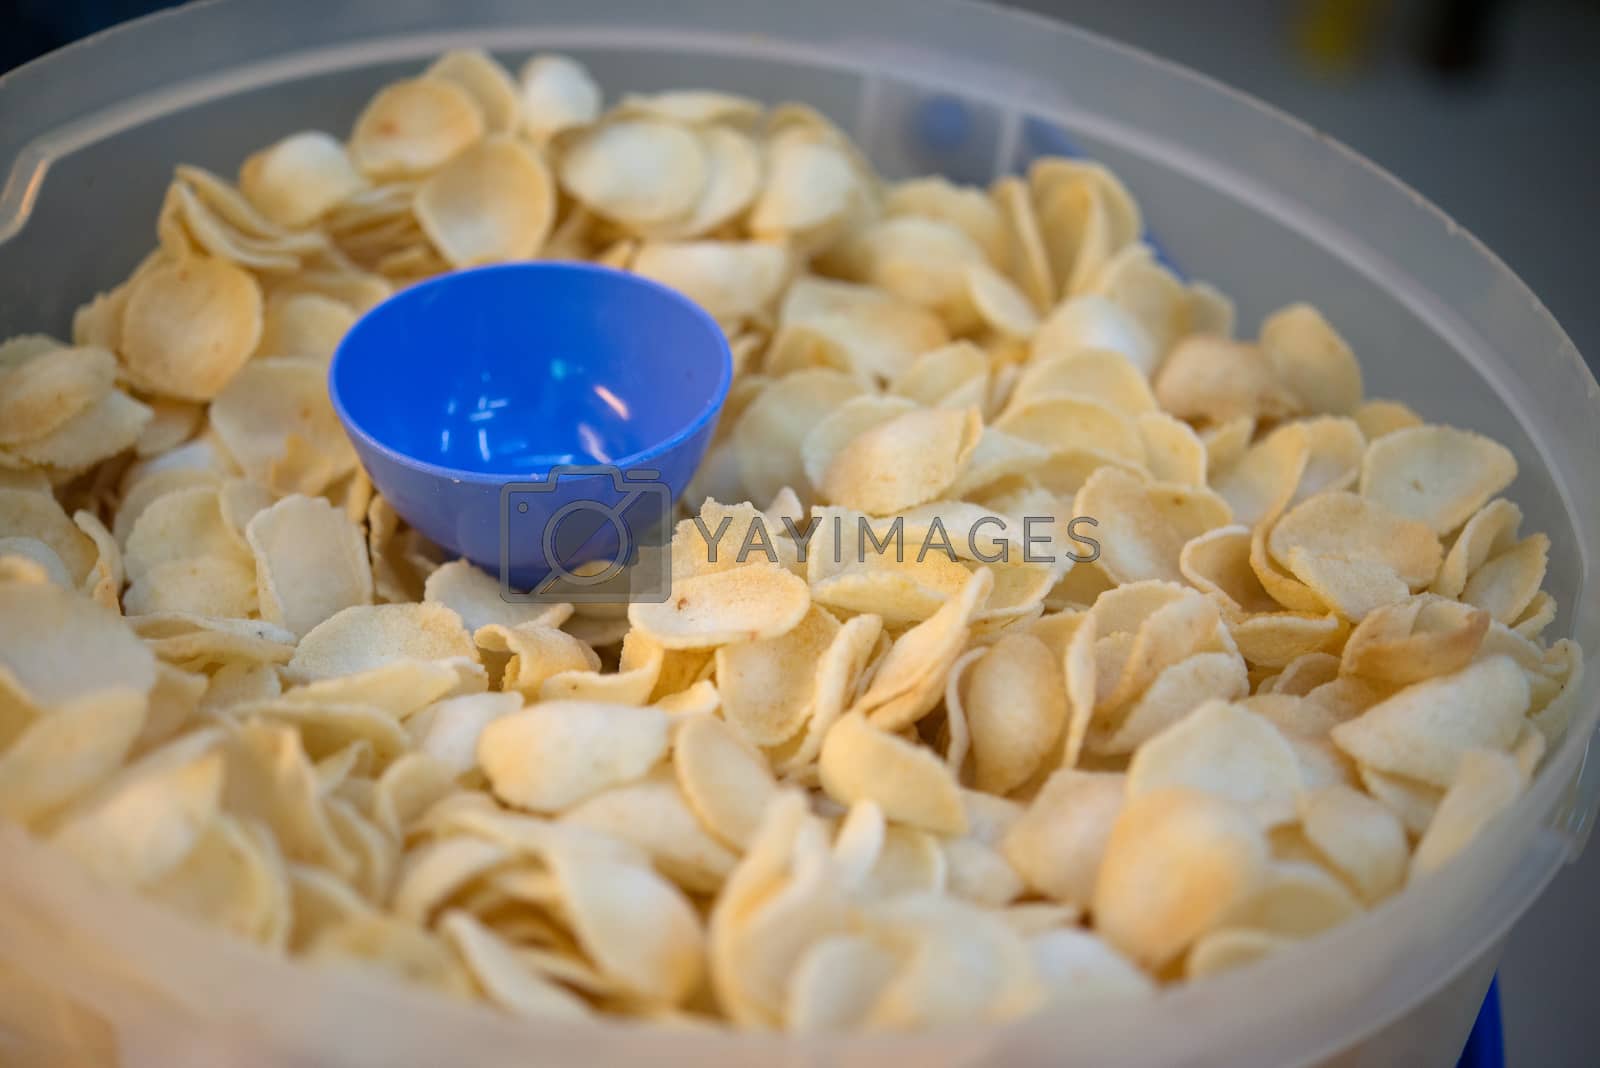 Royalty free image of Keropok seafood crackers. by szefei